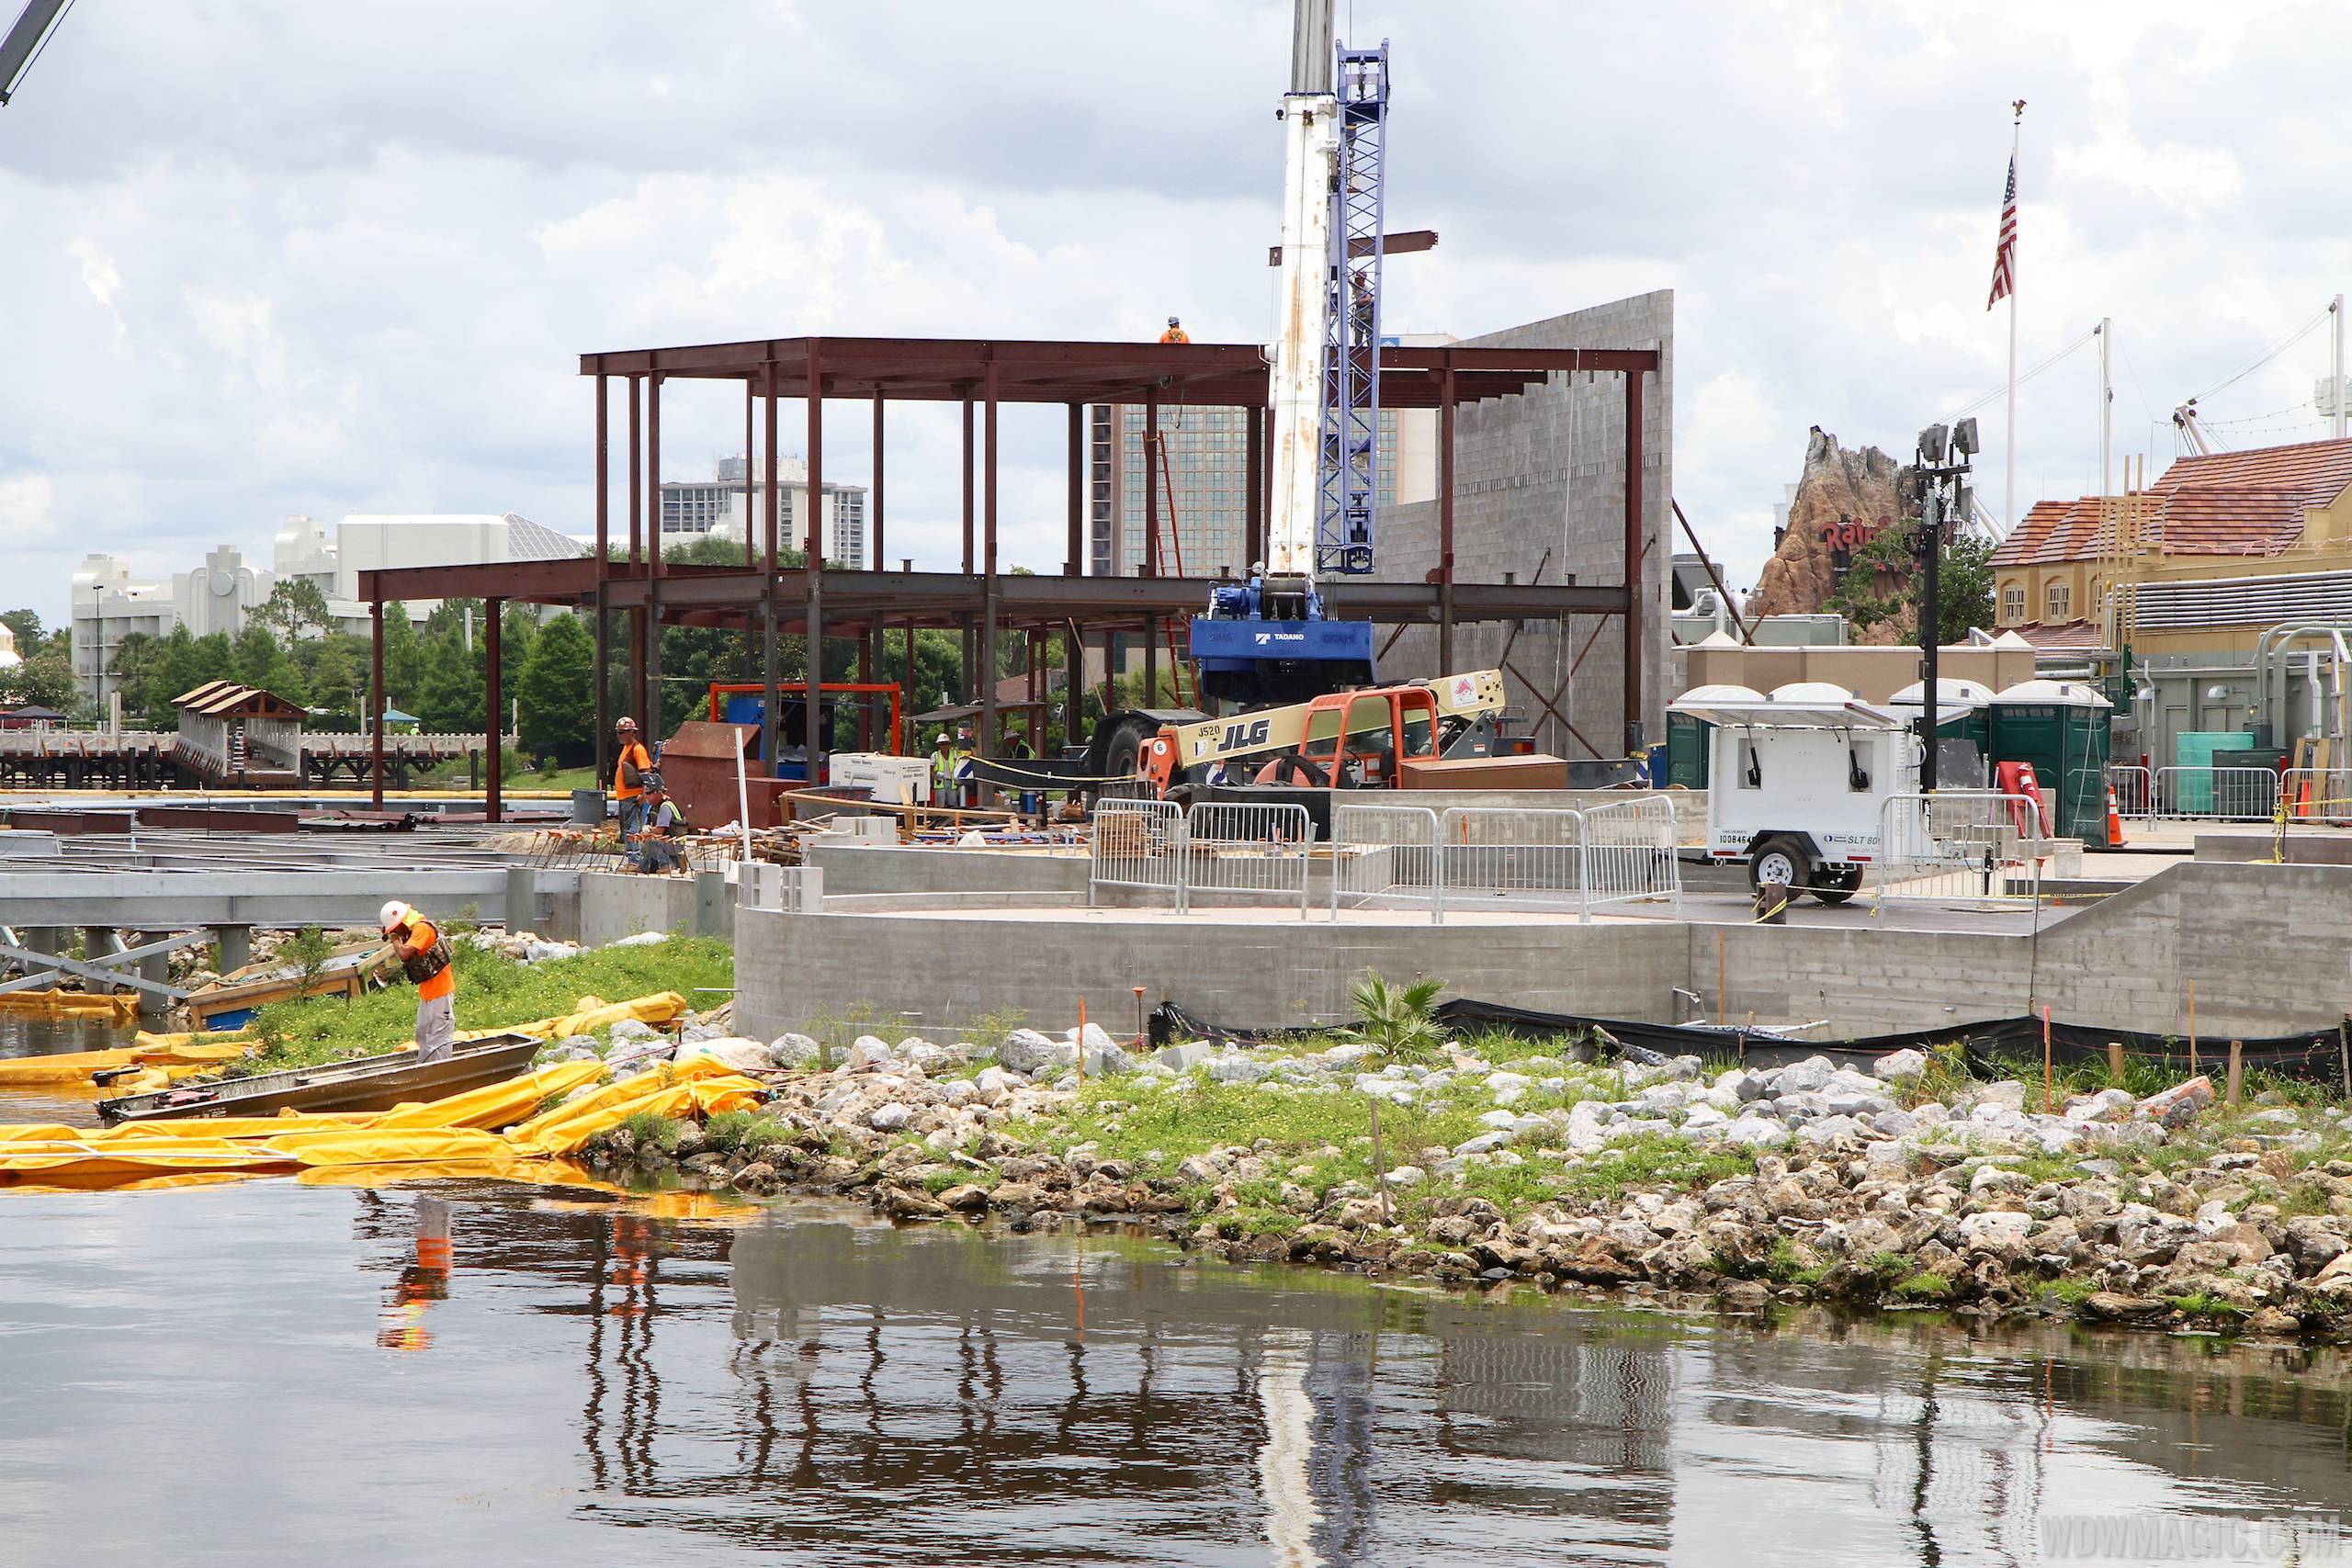 PHOTOS - The Boathouse construction goes vertical at Disney Springs 'The Landing'